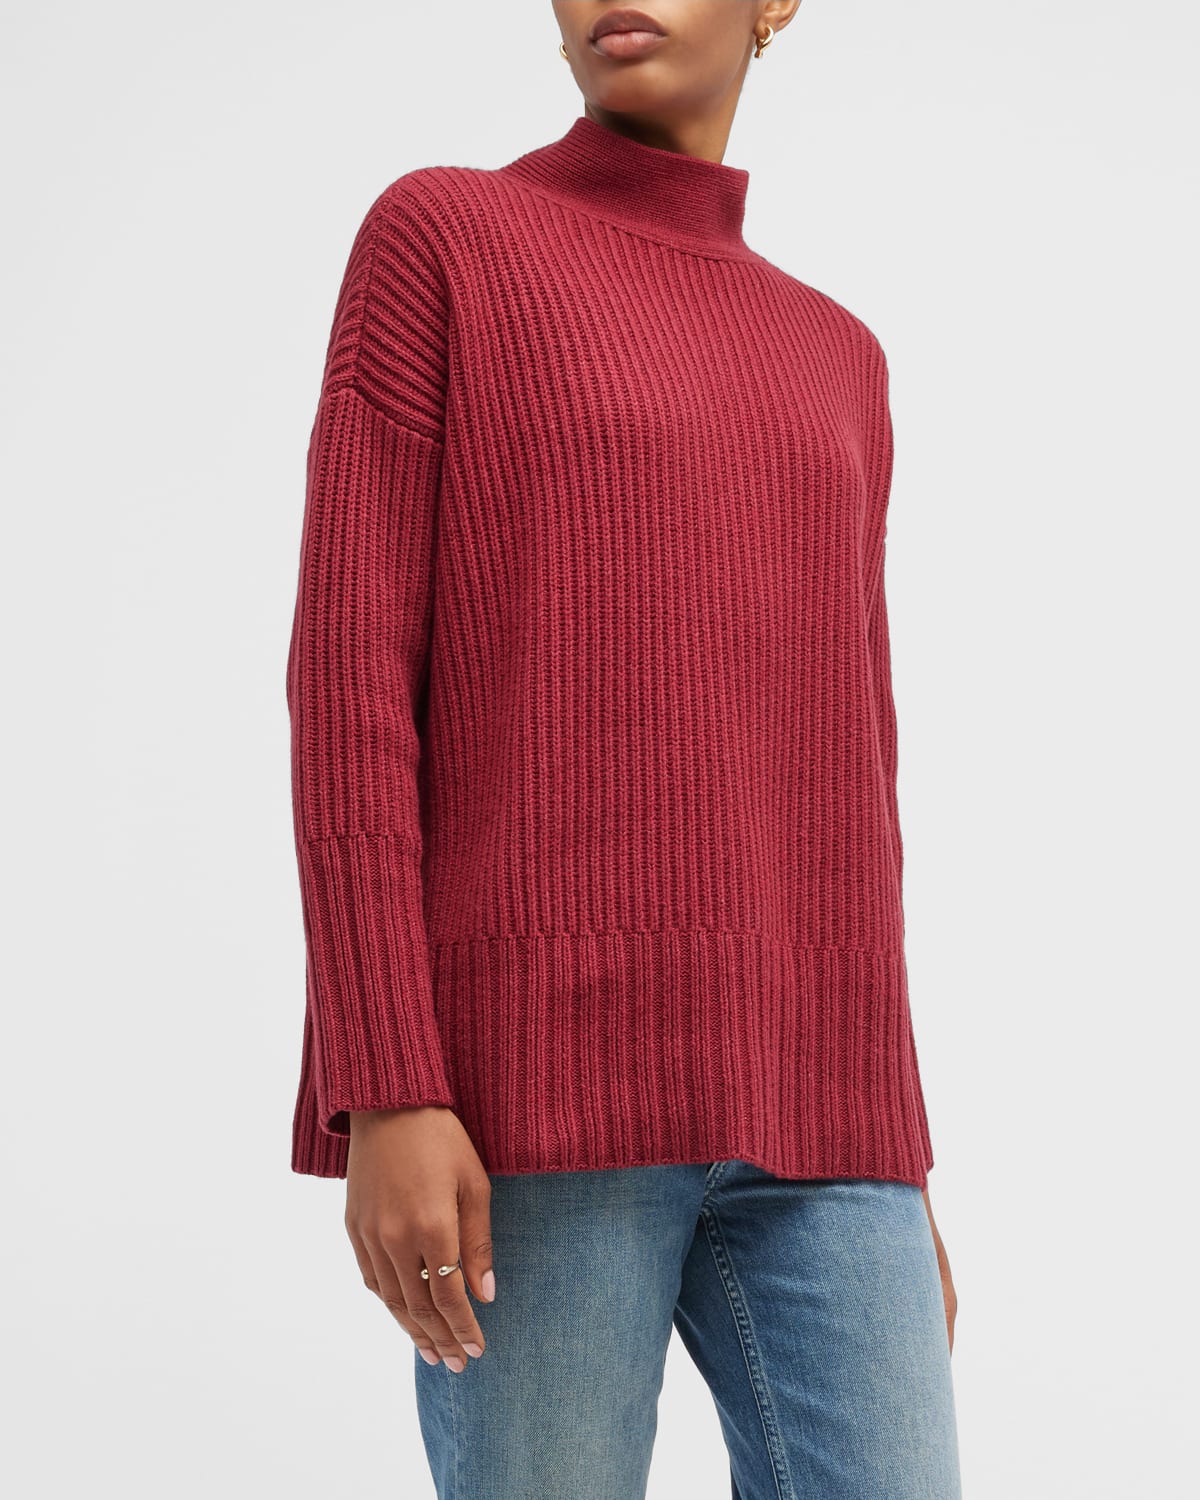 Red Long Sp 45 Sp Sleeve Sweater | Neiman Marcus